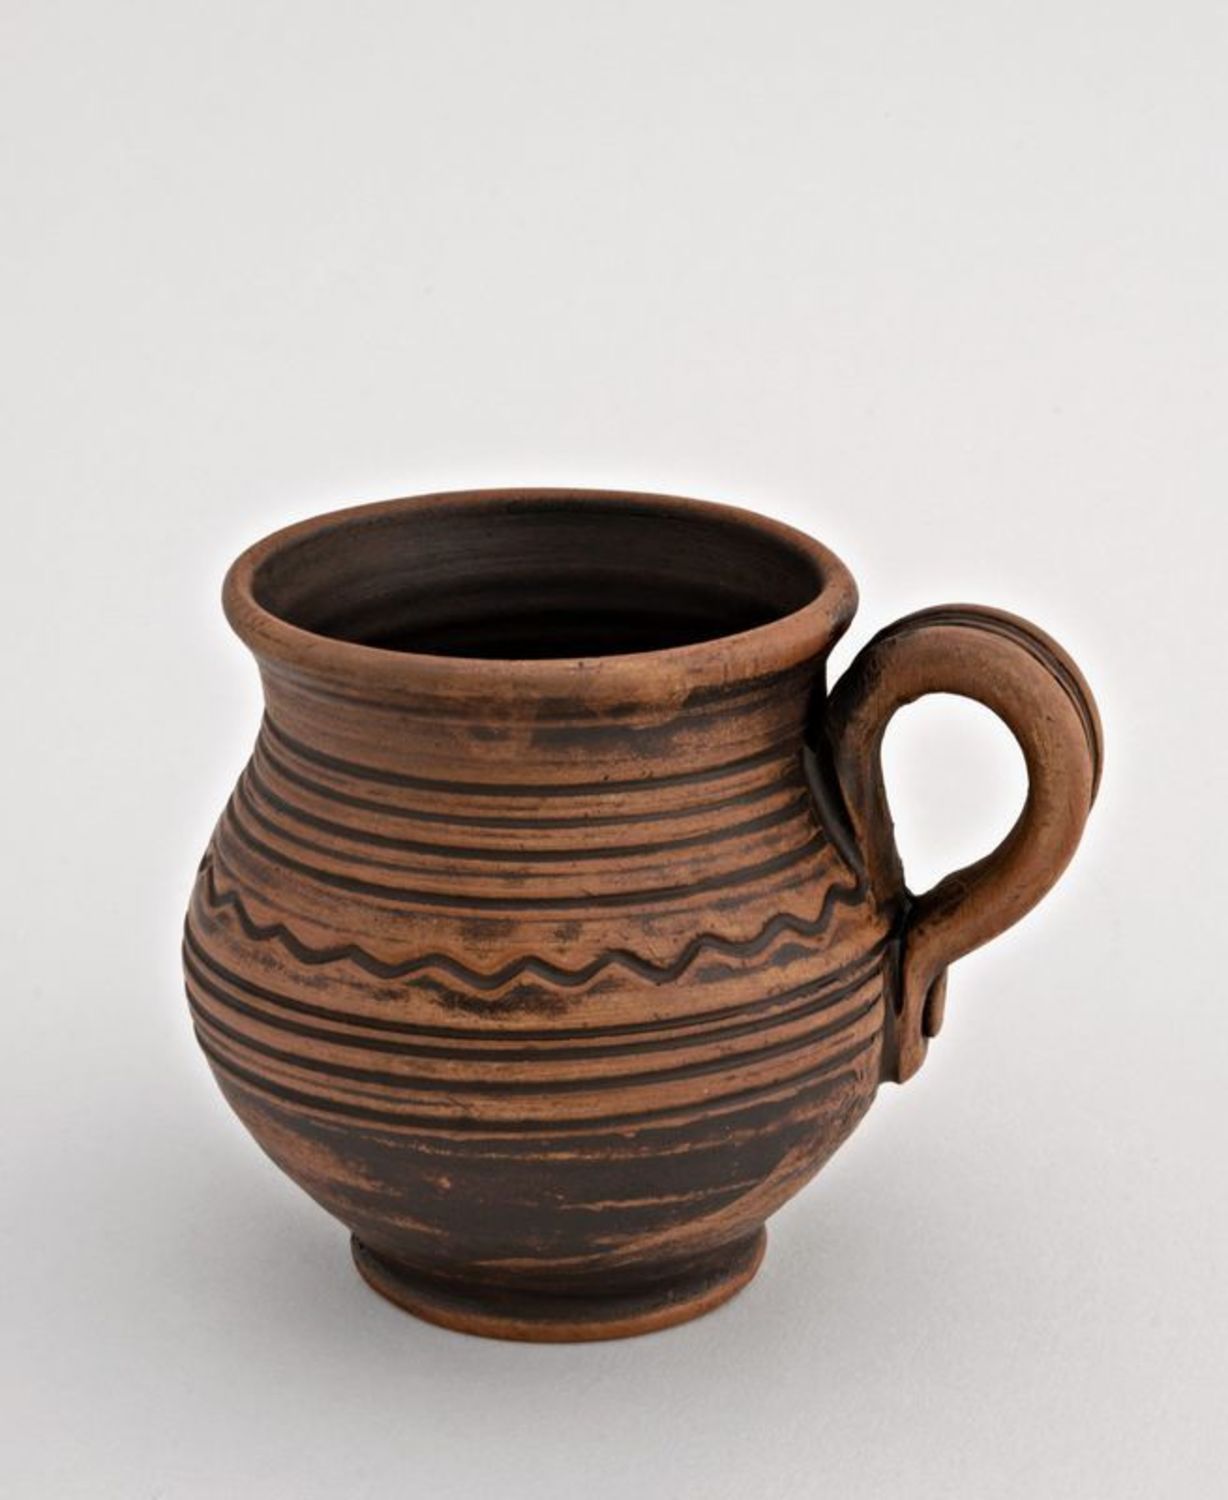 5 oz brown glazed rustic pitcher shape coffee cup with handle and pattern photo 5